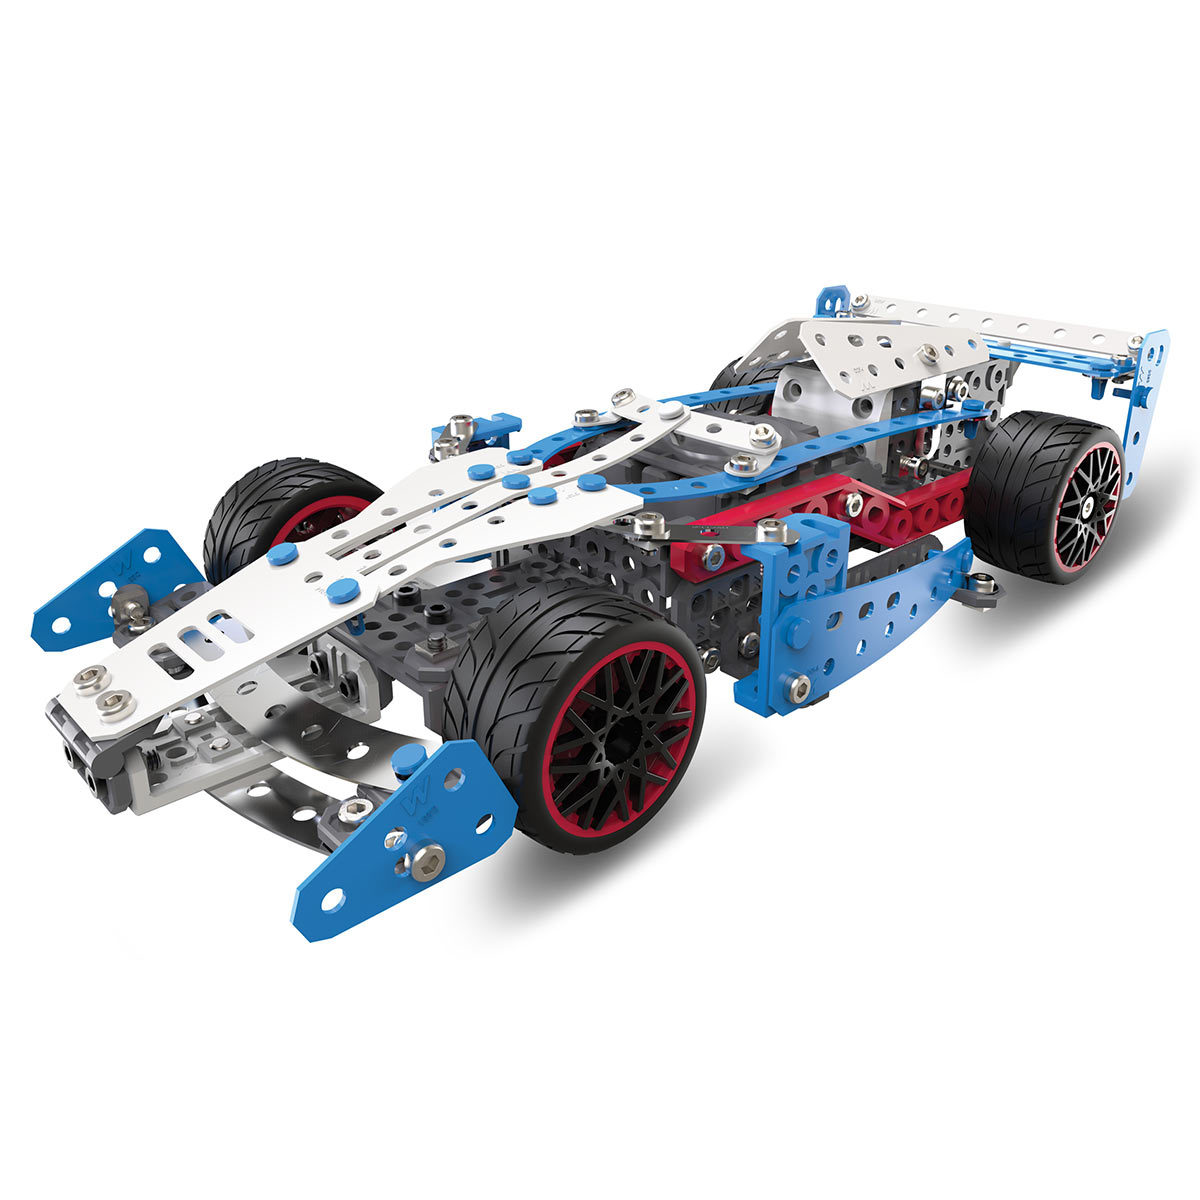 Meccano 27 in 1 race car boxed image on white background